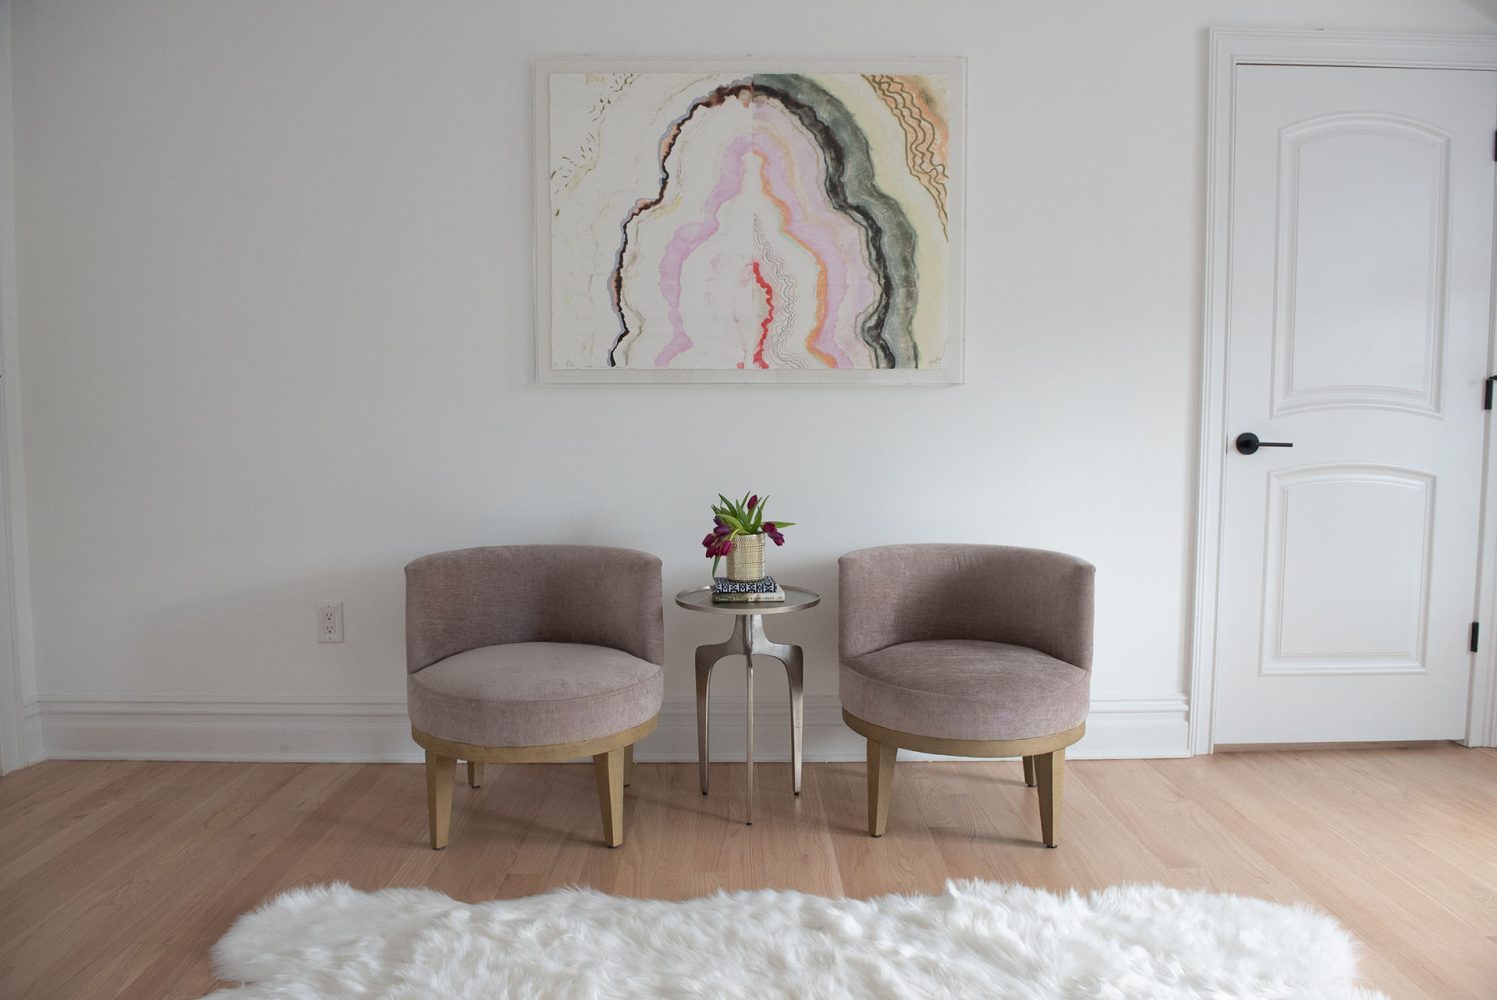 White wall with white deep shag throw rug on light wood floor, pair of taupe upholstered chairs with modern occasional table in between, pastel abstract art on wall.